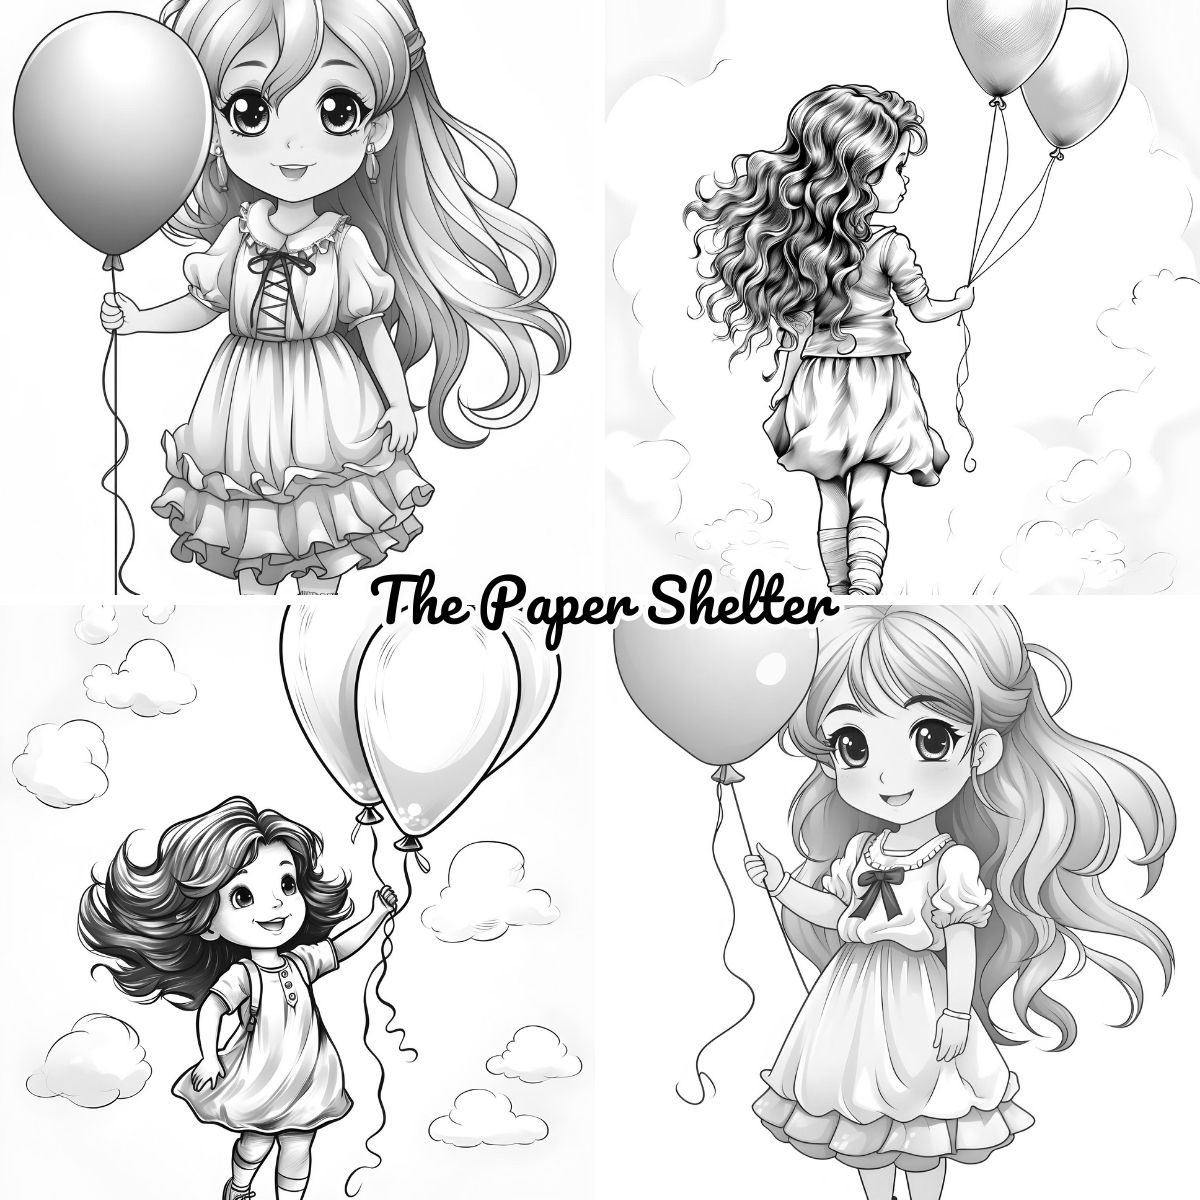 Balloons Of Bliss - Digital Coloring Book